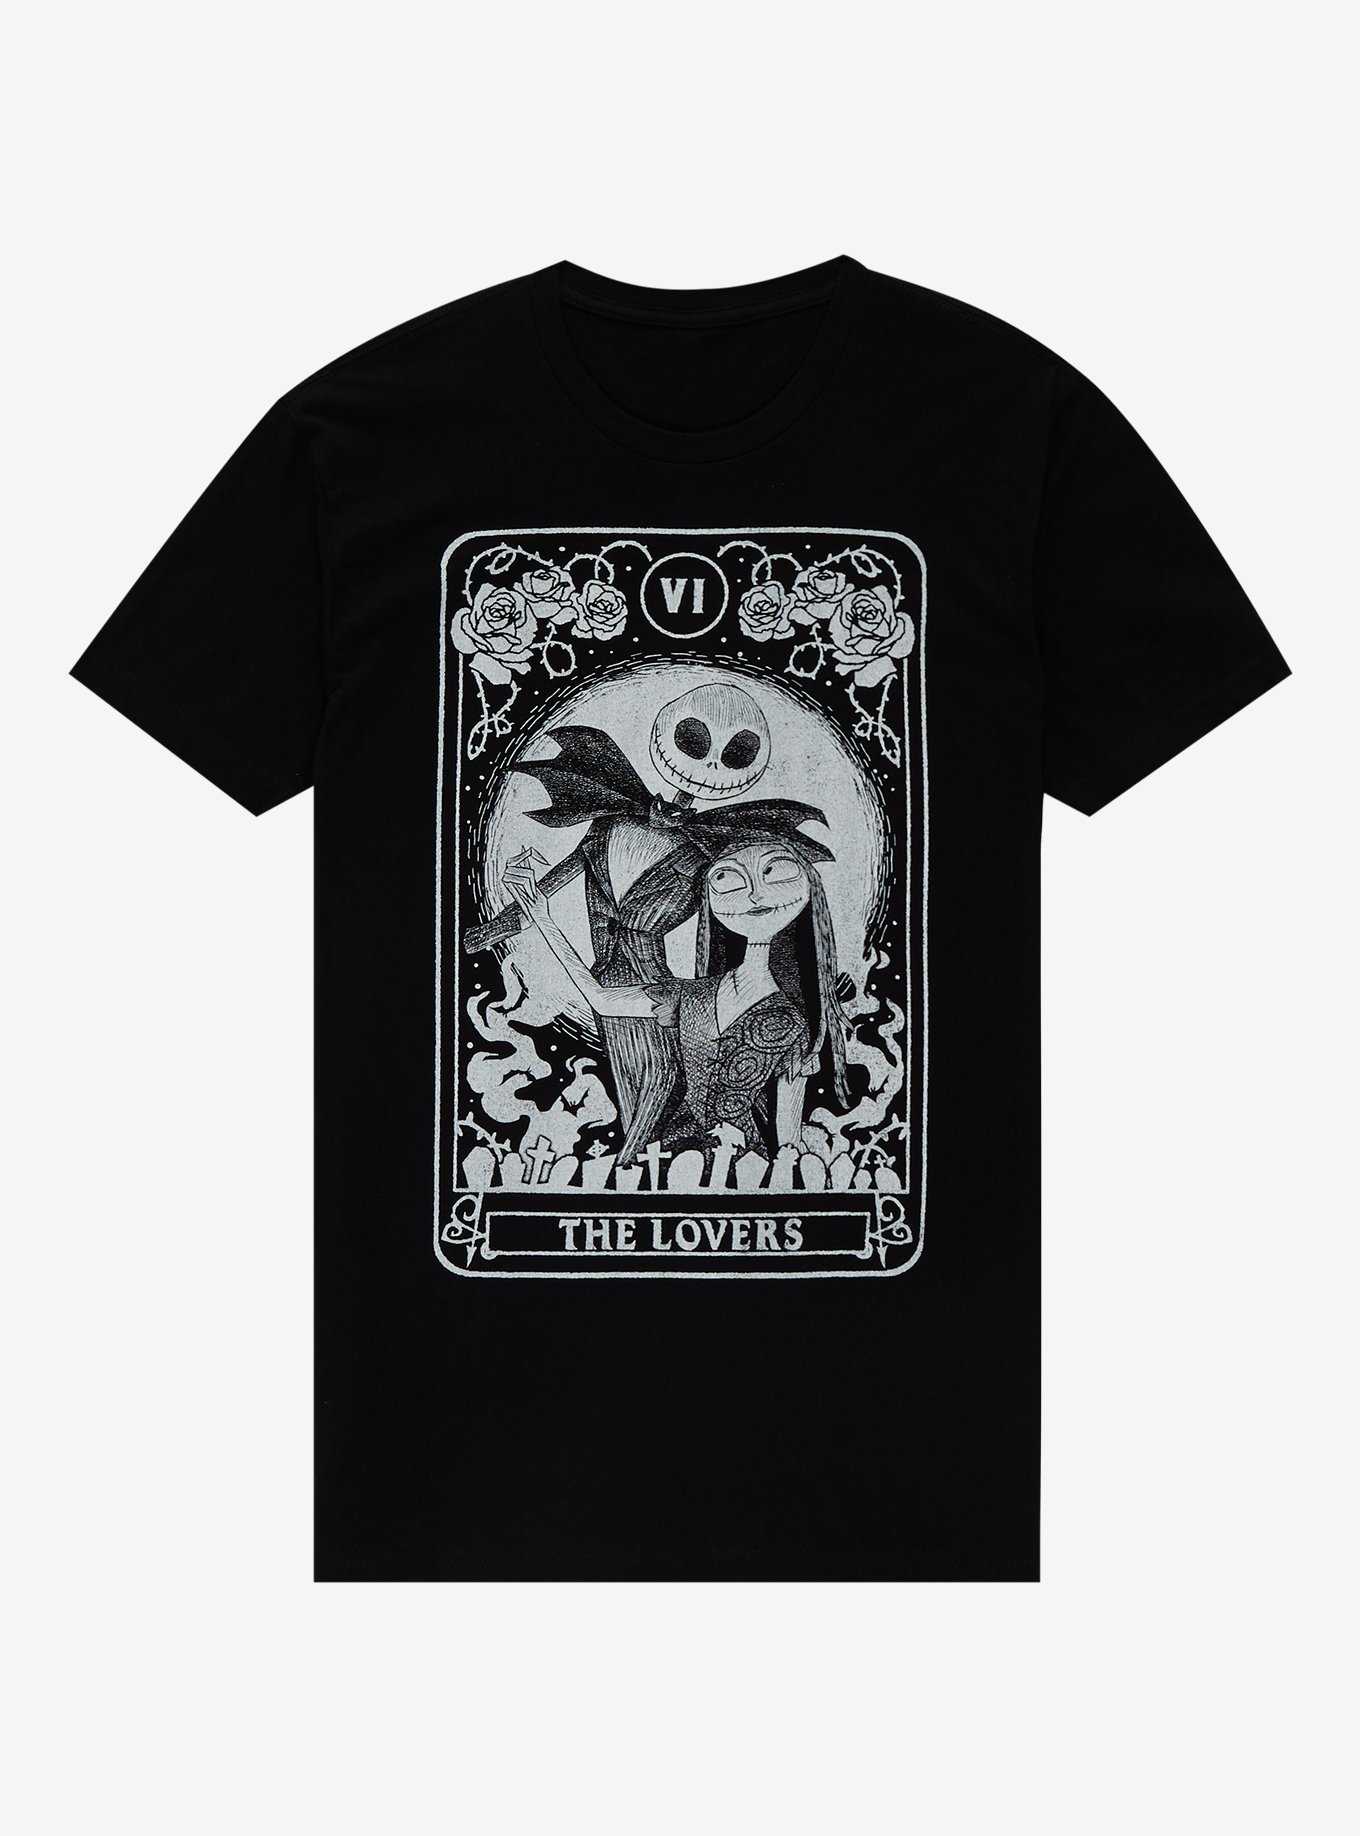 Help me find this shirt I bought from Disneyland in 2017. Nightmare Before  Christmas T-Shirt made by Hanes RN#15763 : r/HelpMeFind